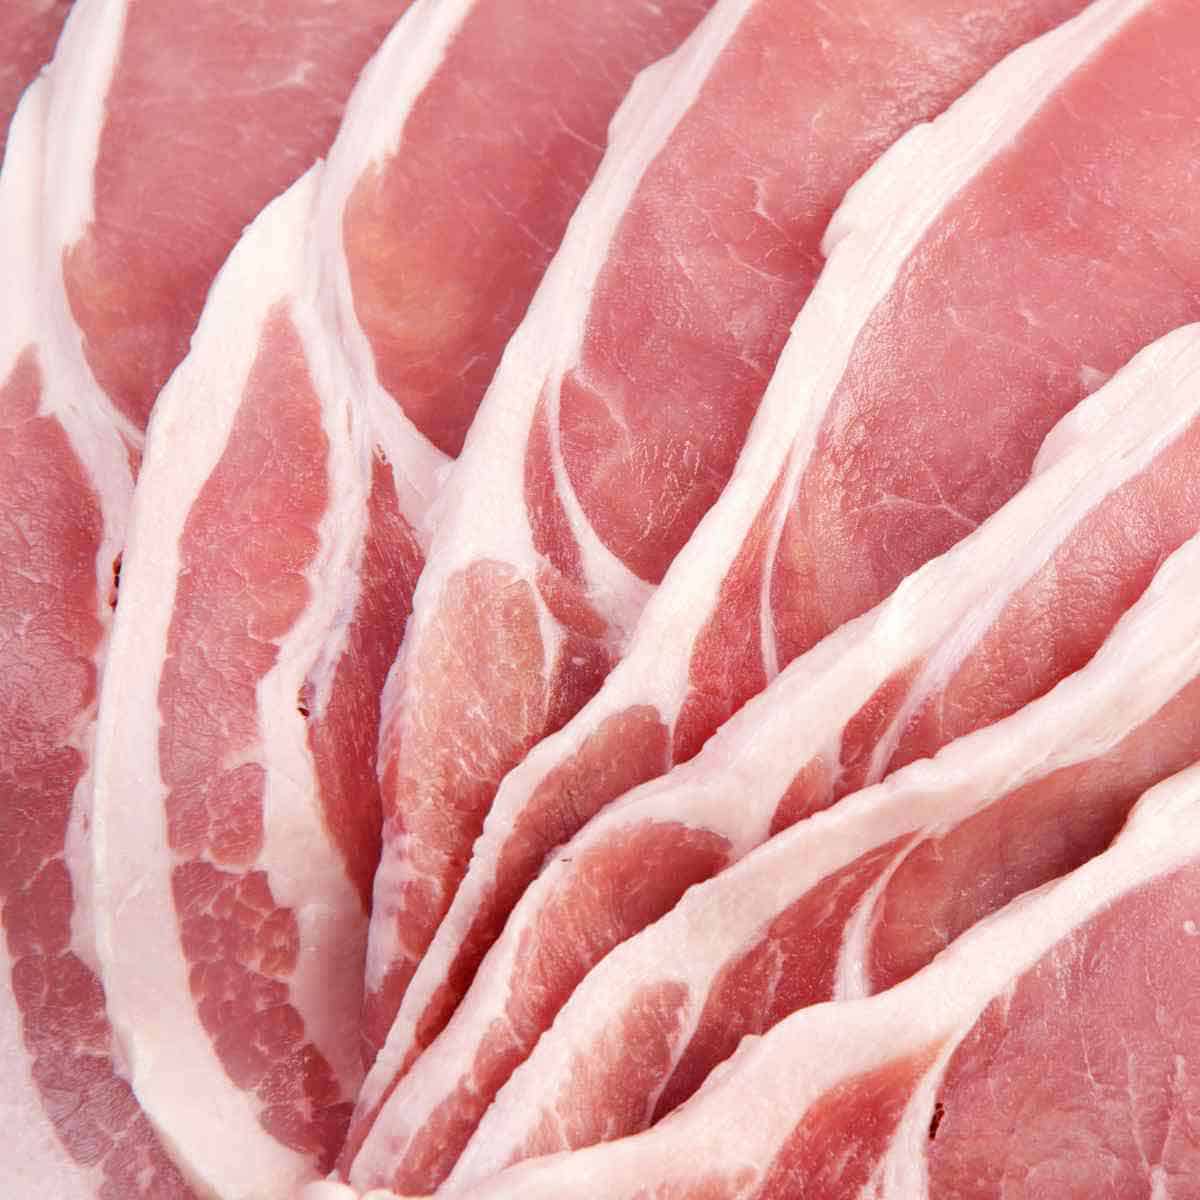 Seven slices of uncooked back bacon.